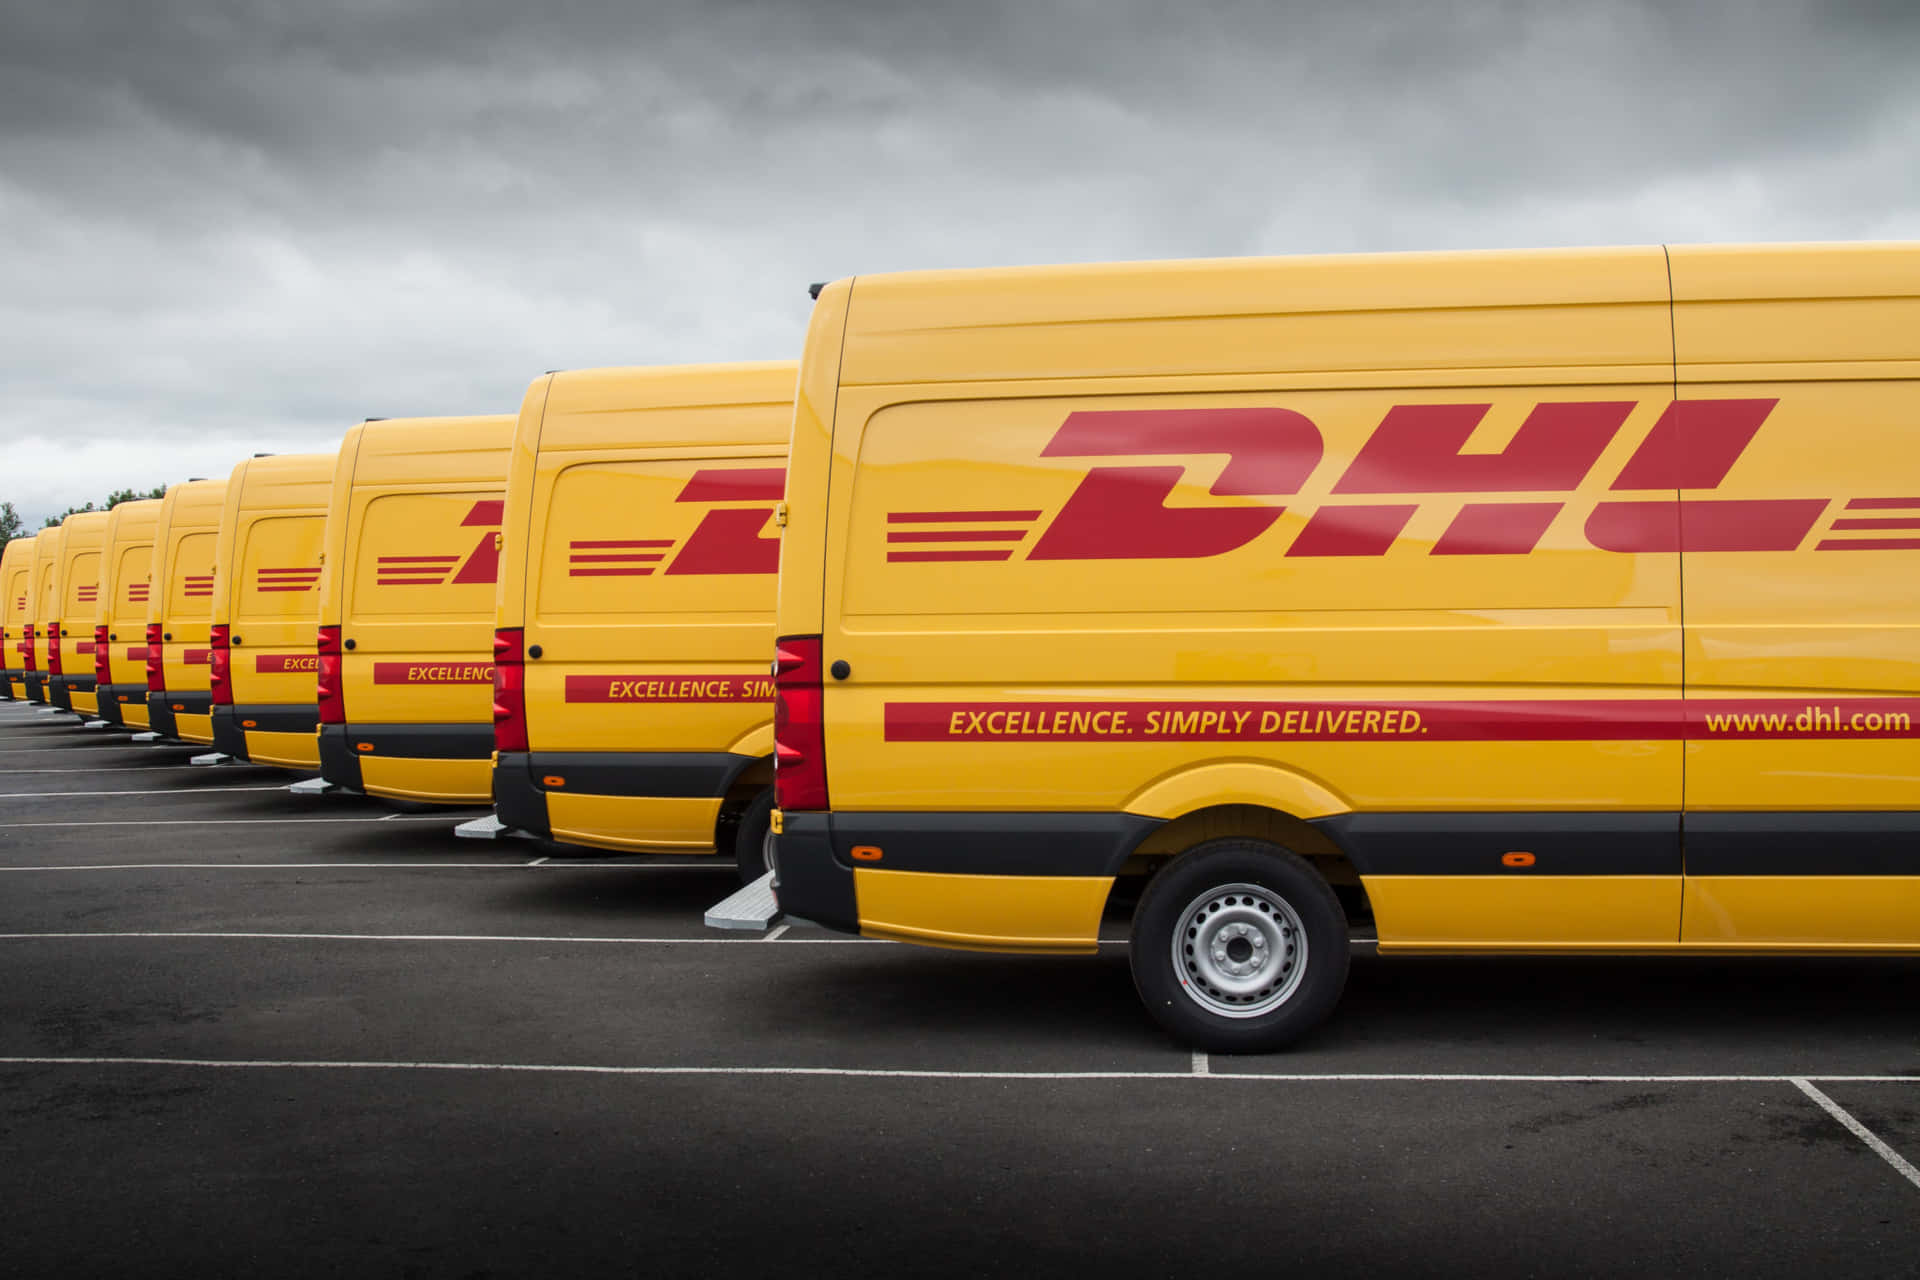 Get your package delivered with DHL – the global leader in logistics and shipping